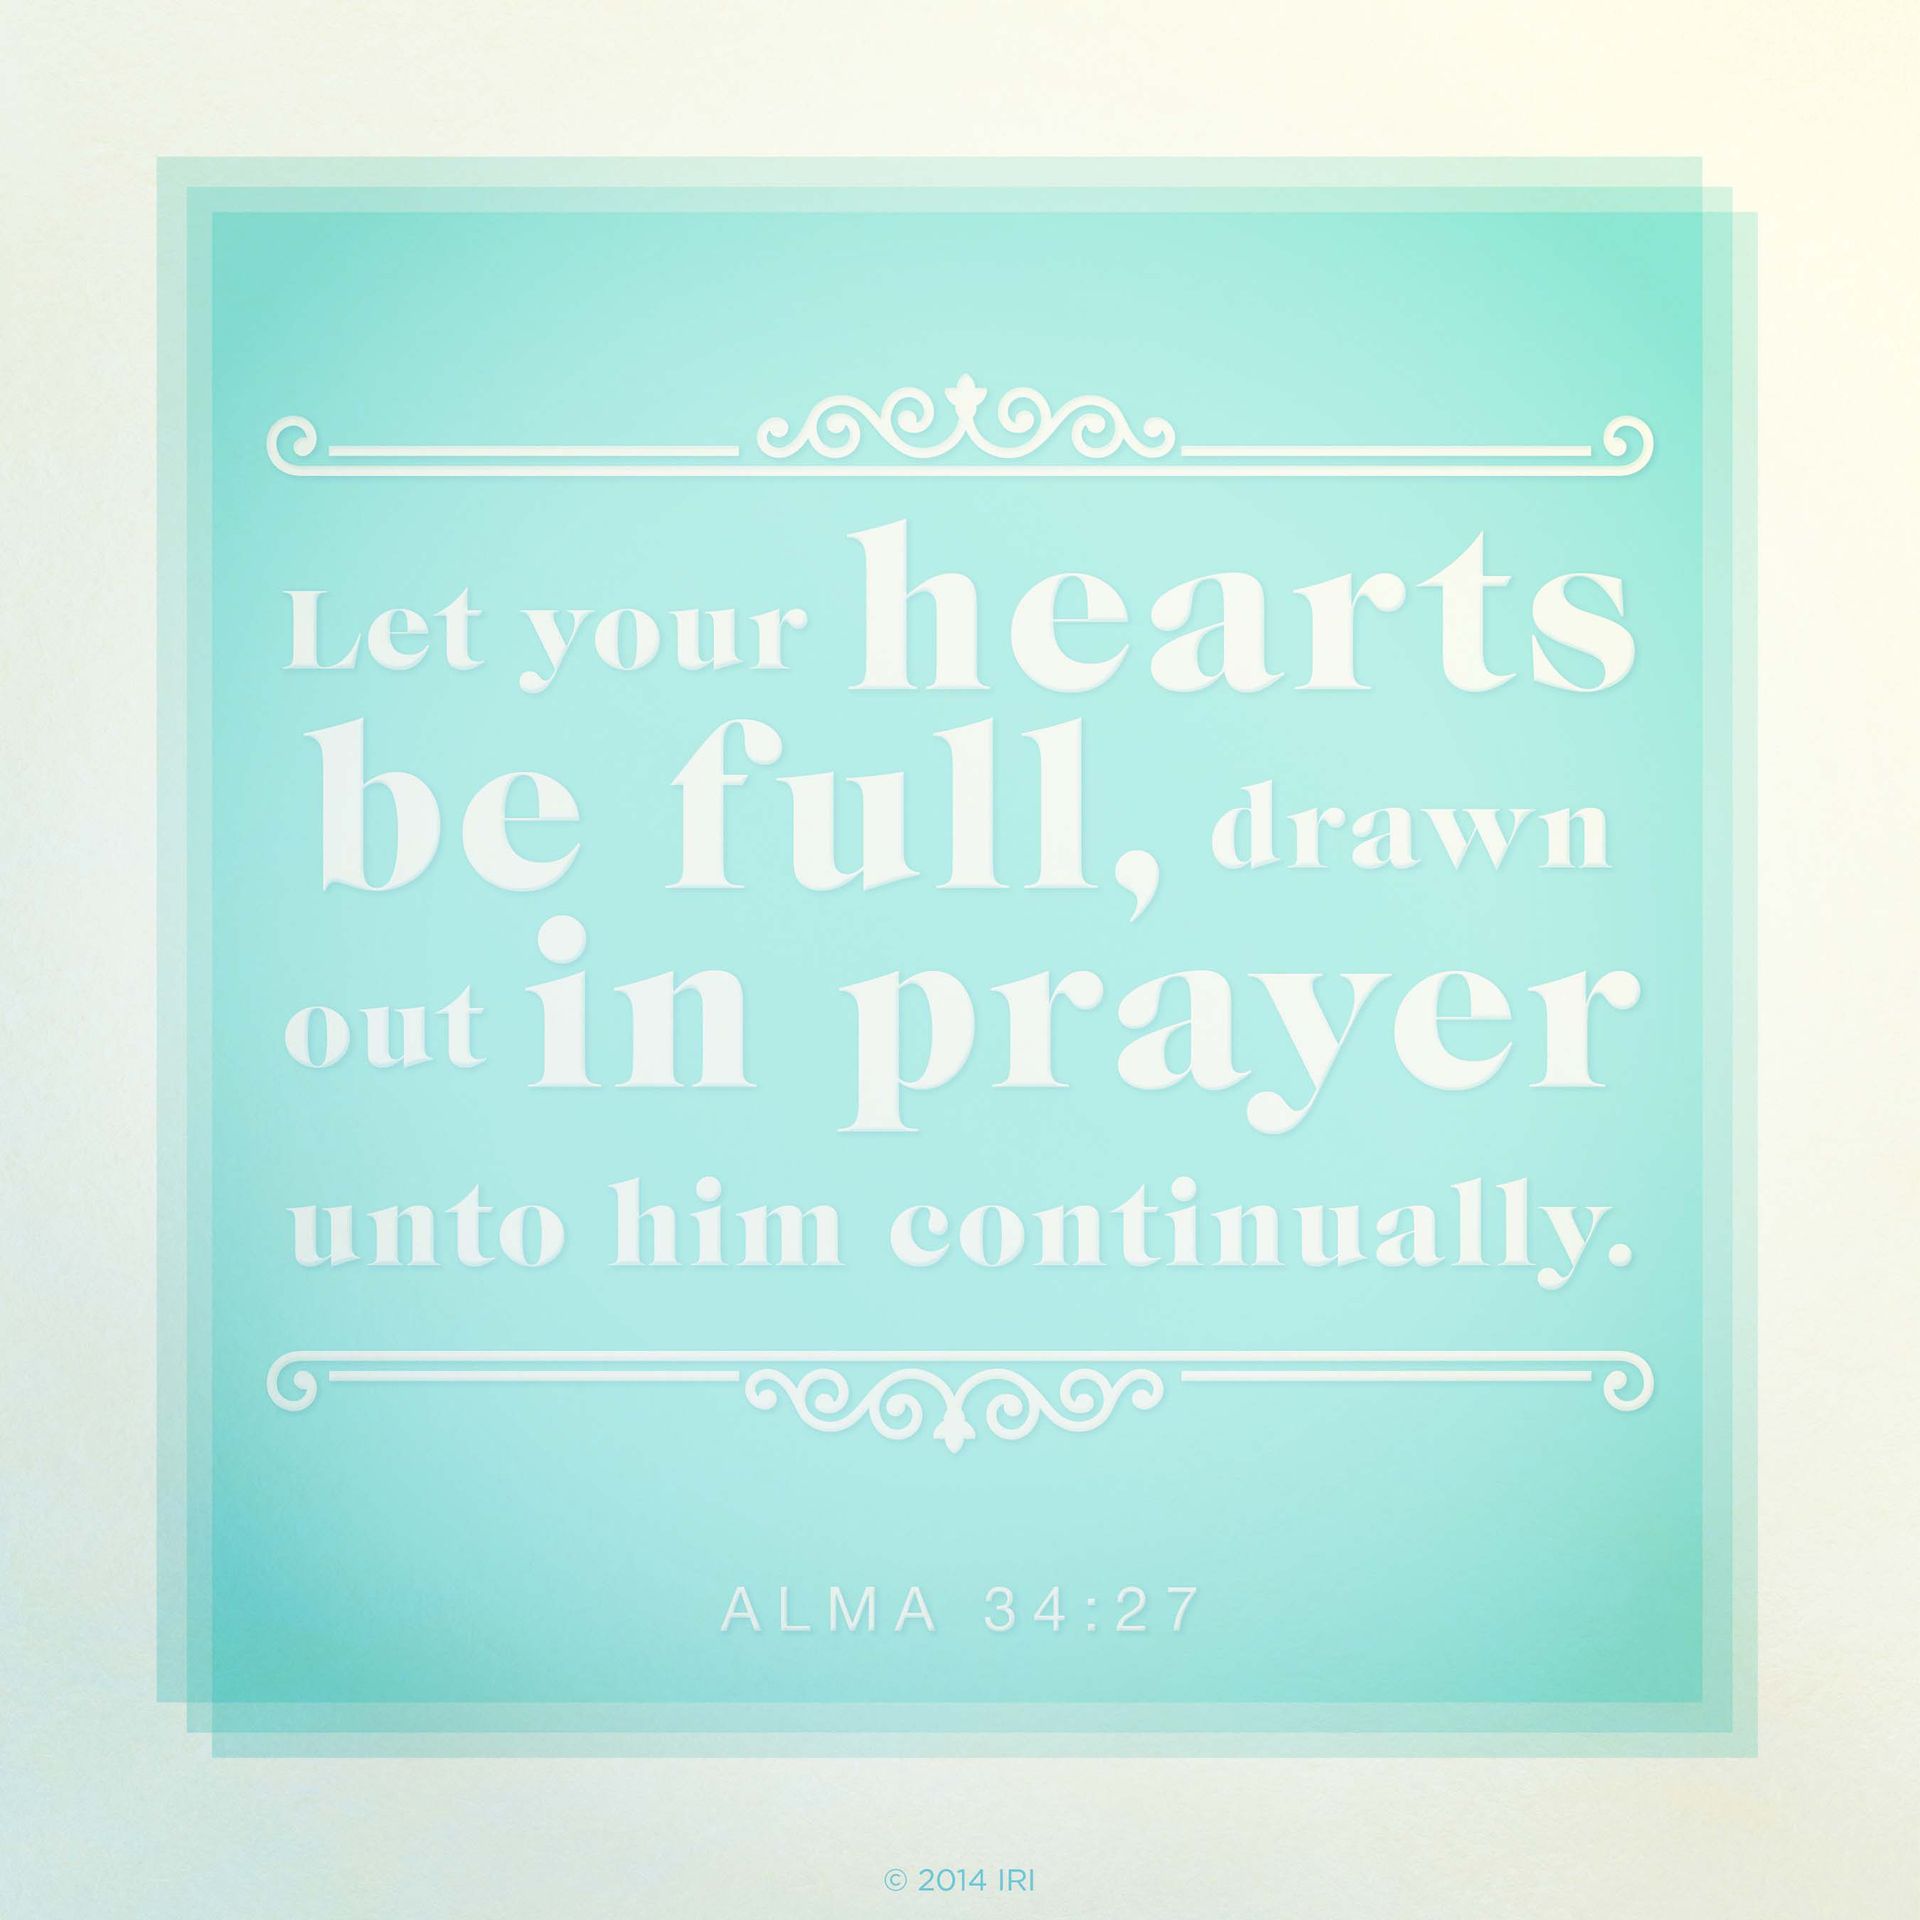 “Let your hearts be full, drawn out in prayer unto him continually.”—Alma 34:27